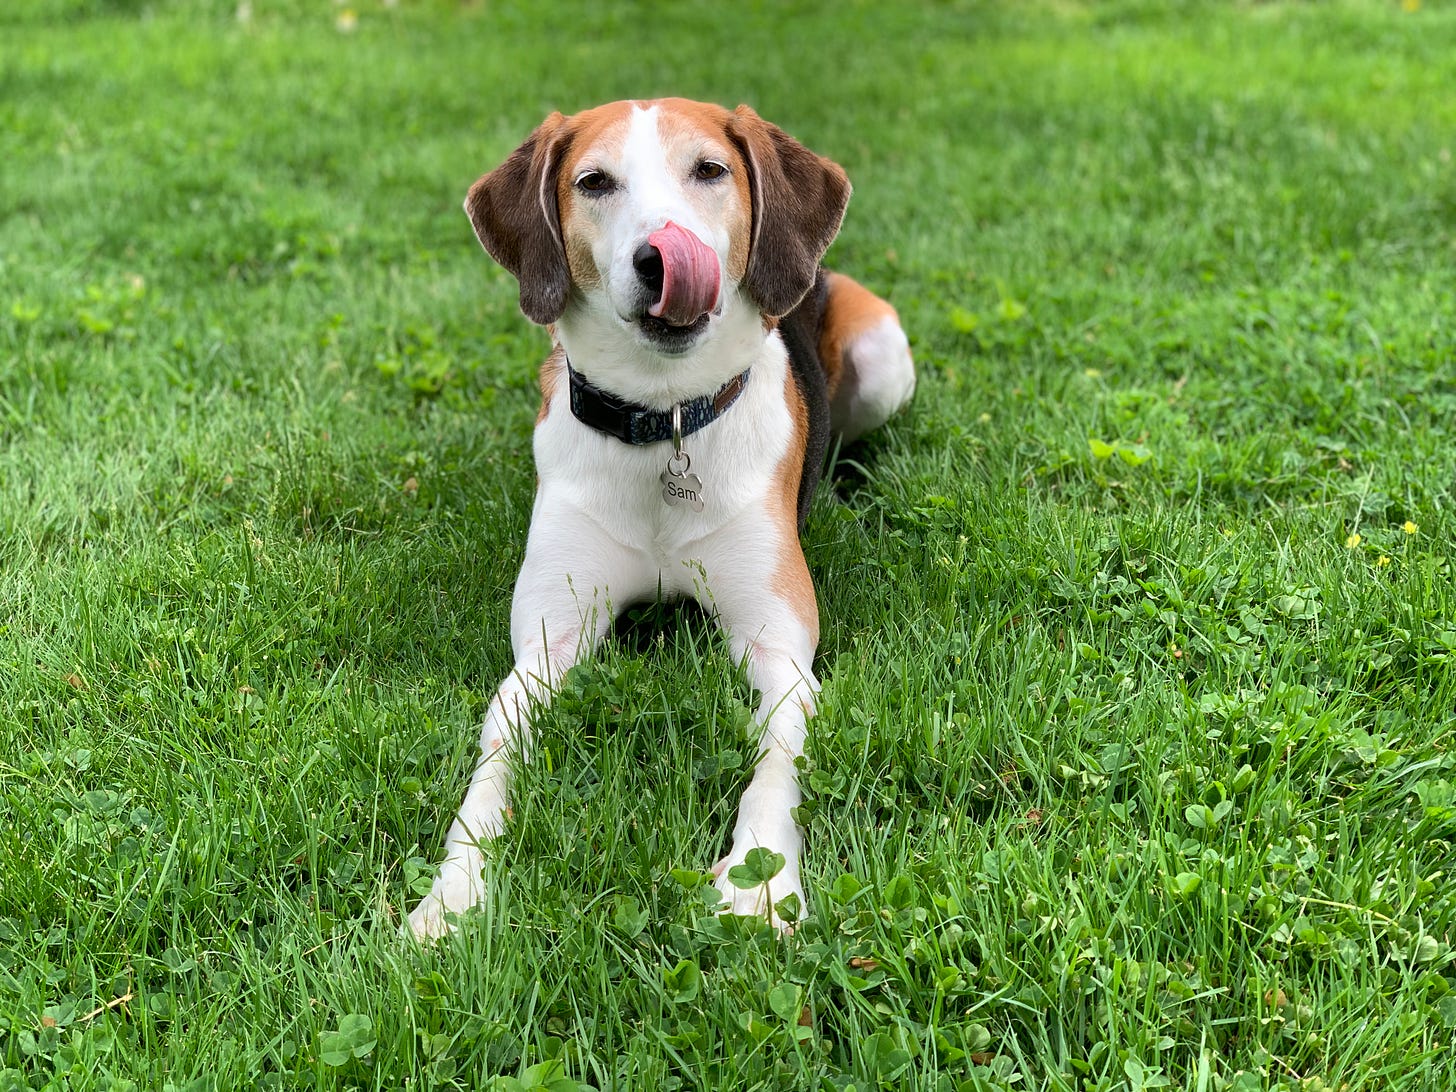 A white, brown and black American Foxhound licks his nose and lounges in the grass.